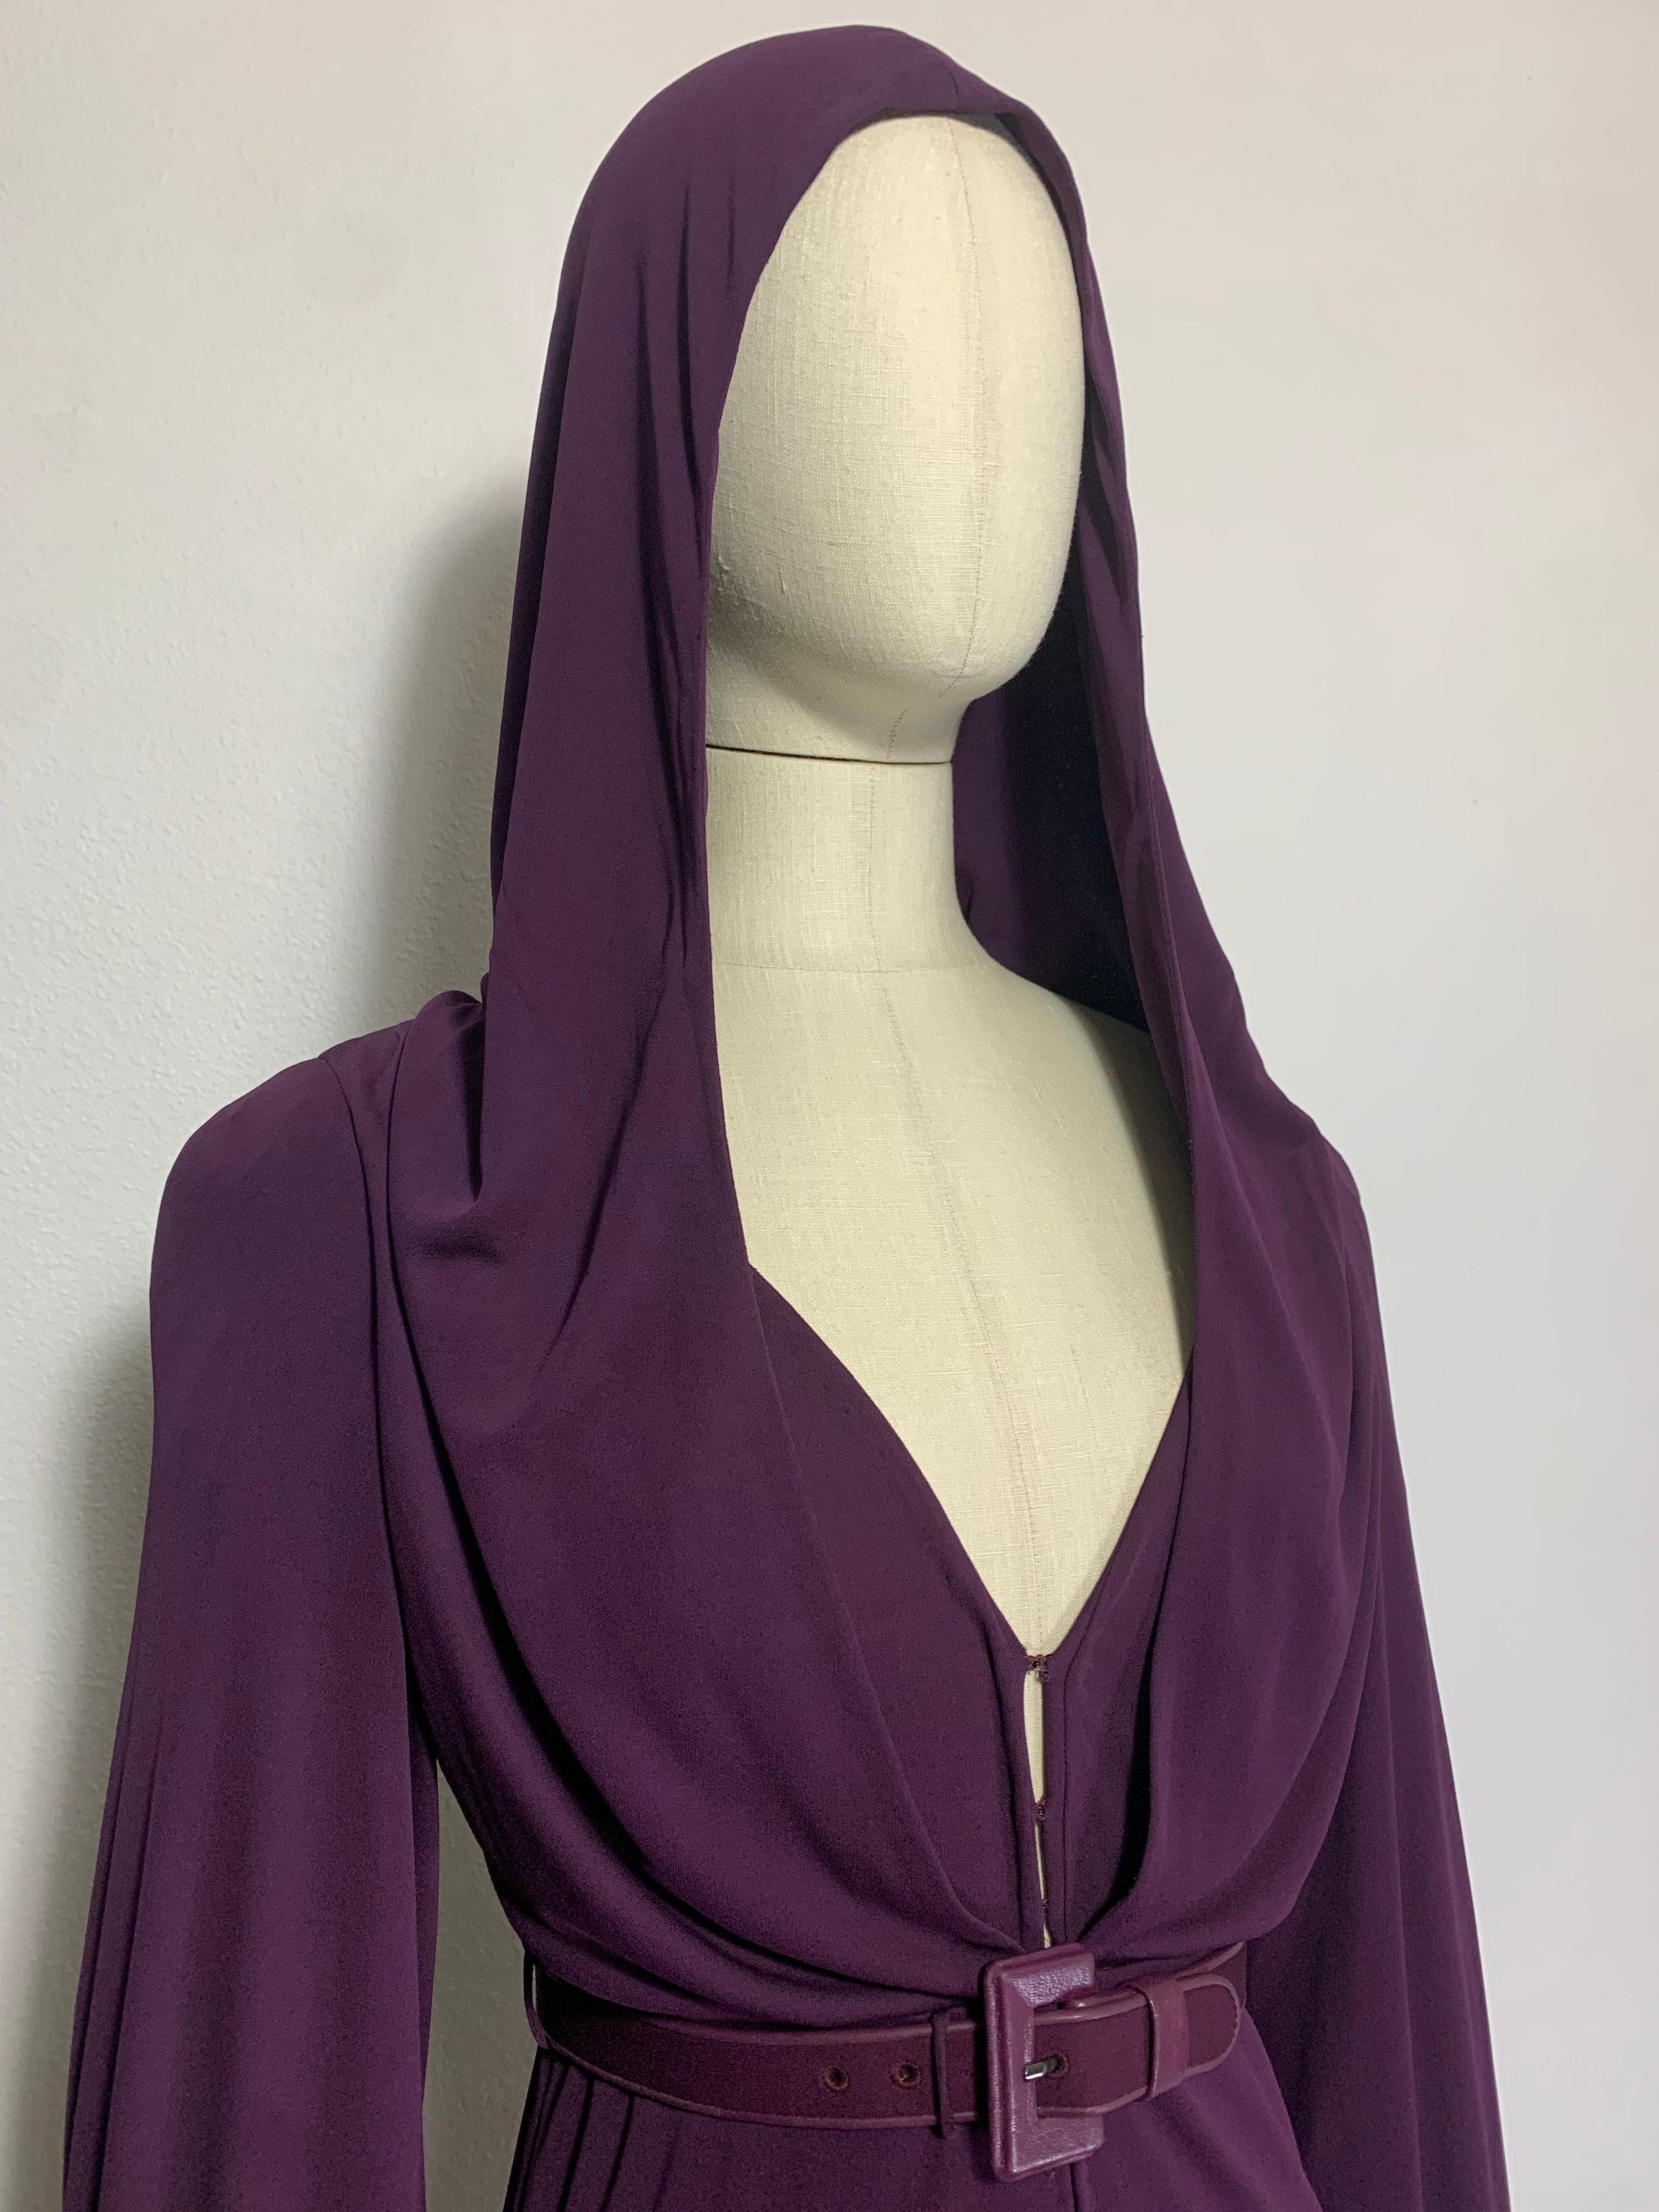 1975 James Galanos Dramatic Aubergine Jersey Maxi Gown w Fabulous Draped Hood For Sale 1